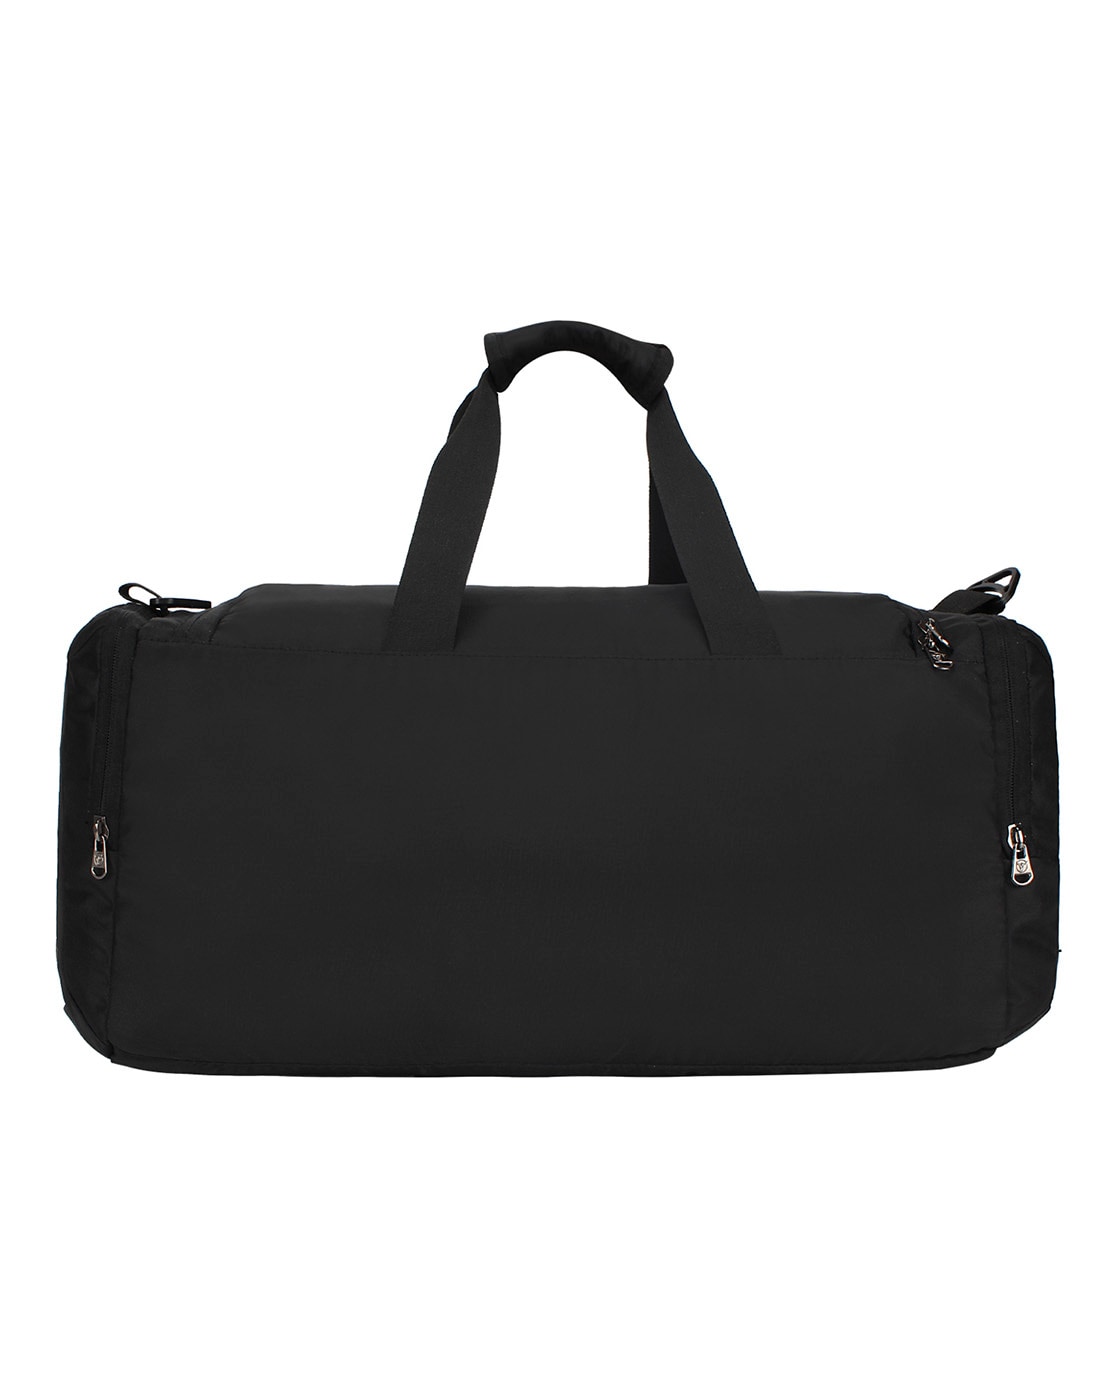 Buy Ted Baker Black Textured Leather Duffle Bag Online  574050  The  Collective